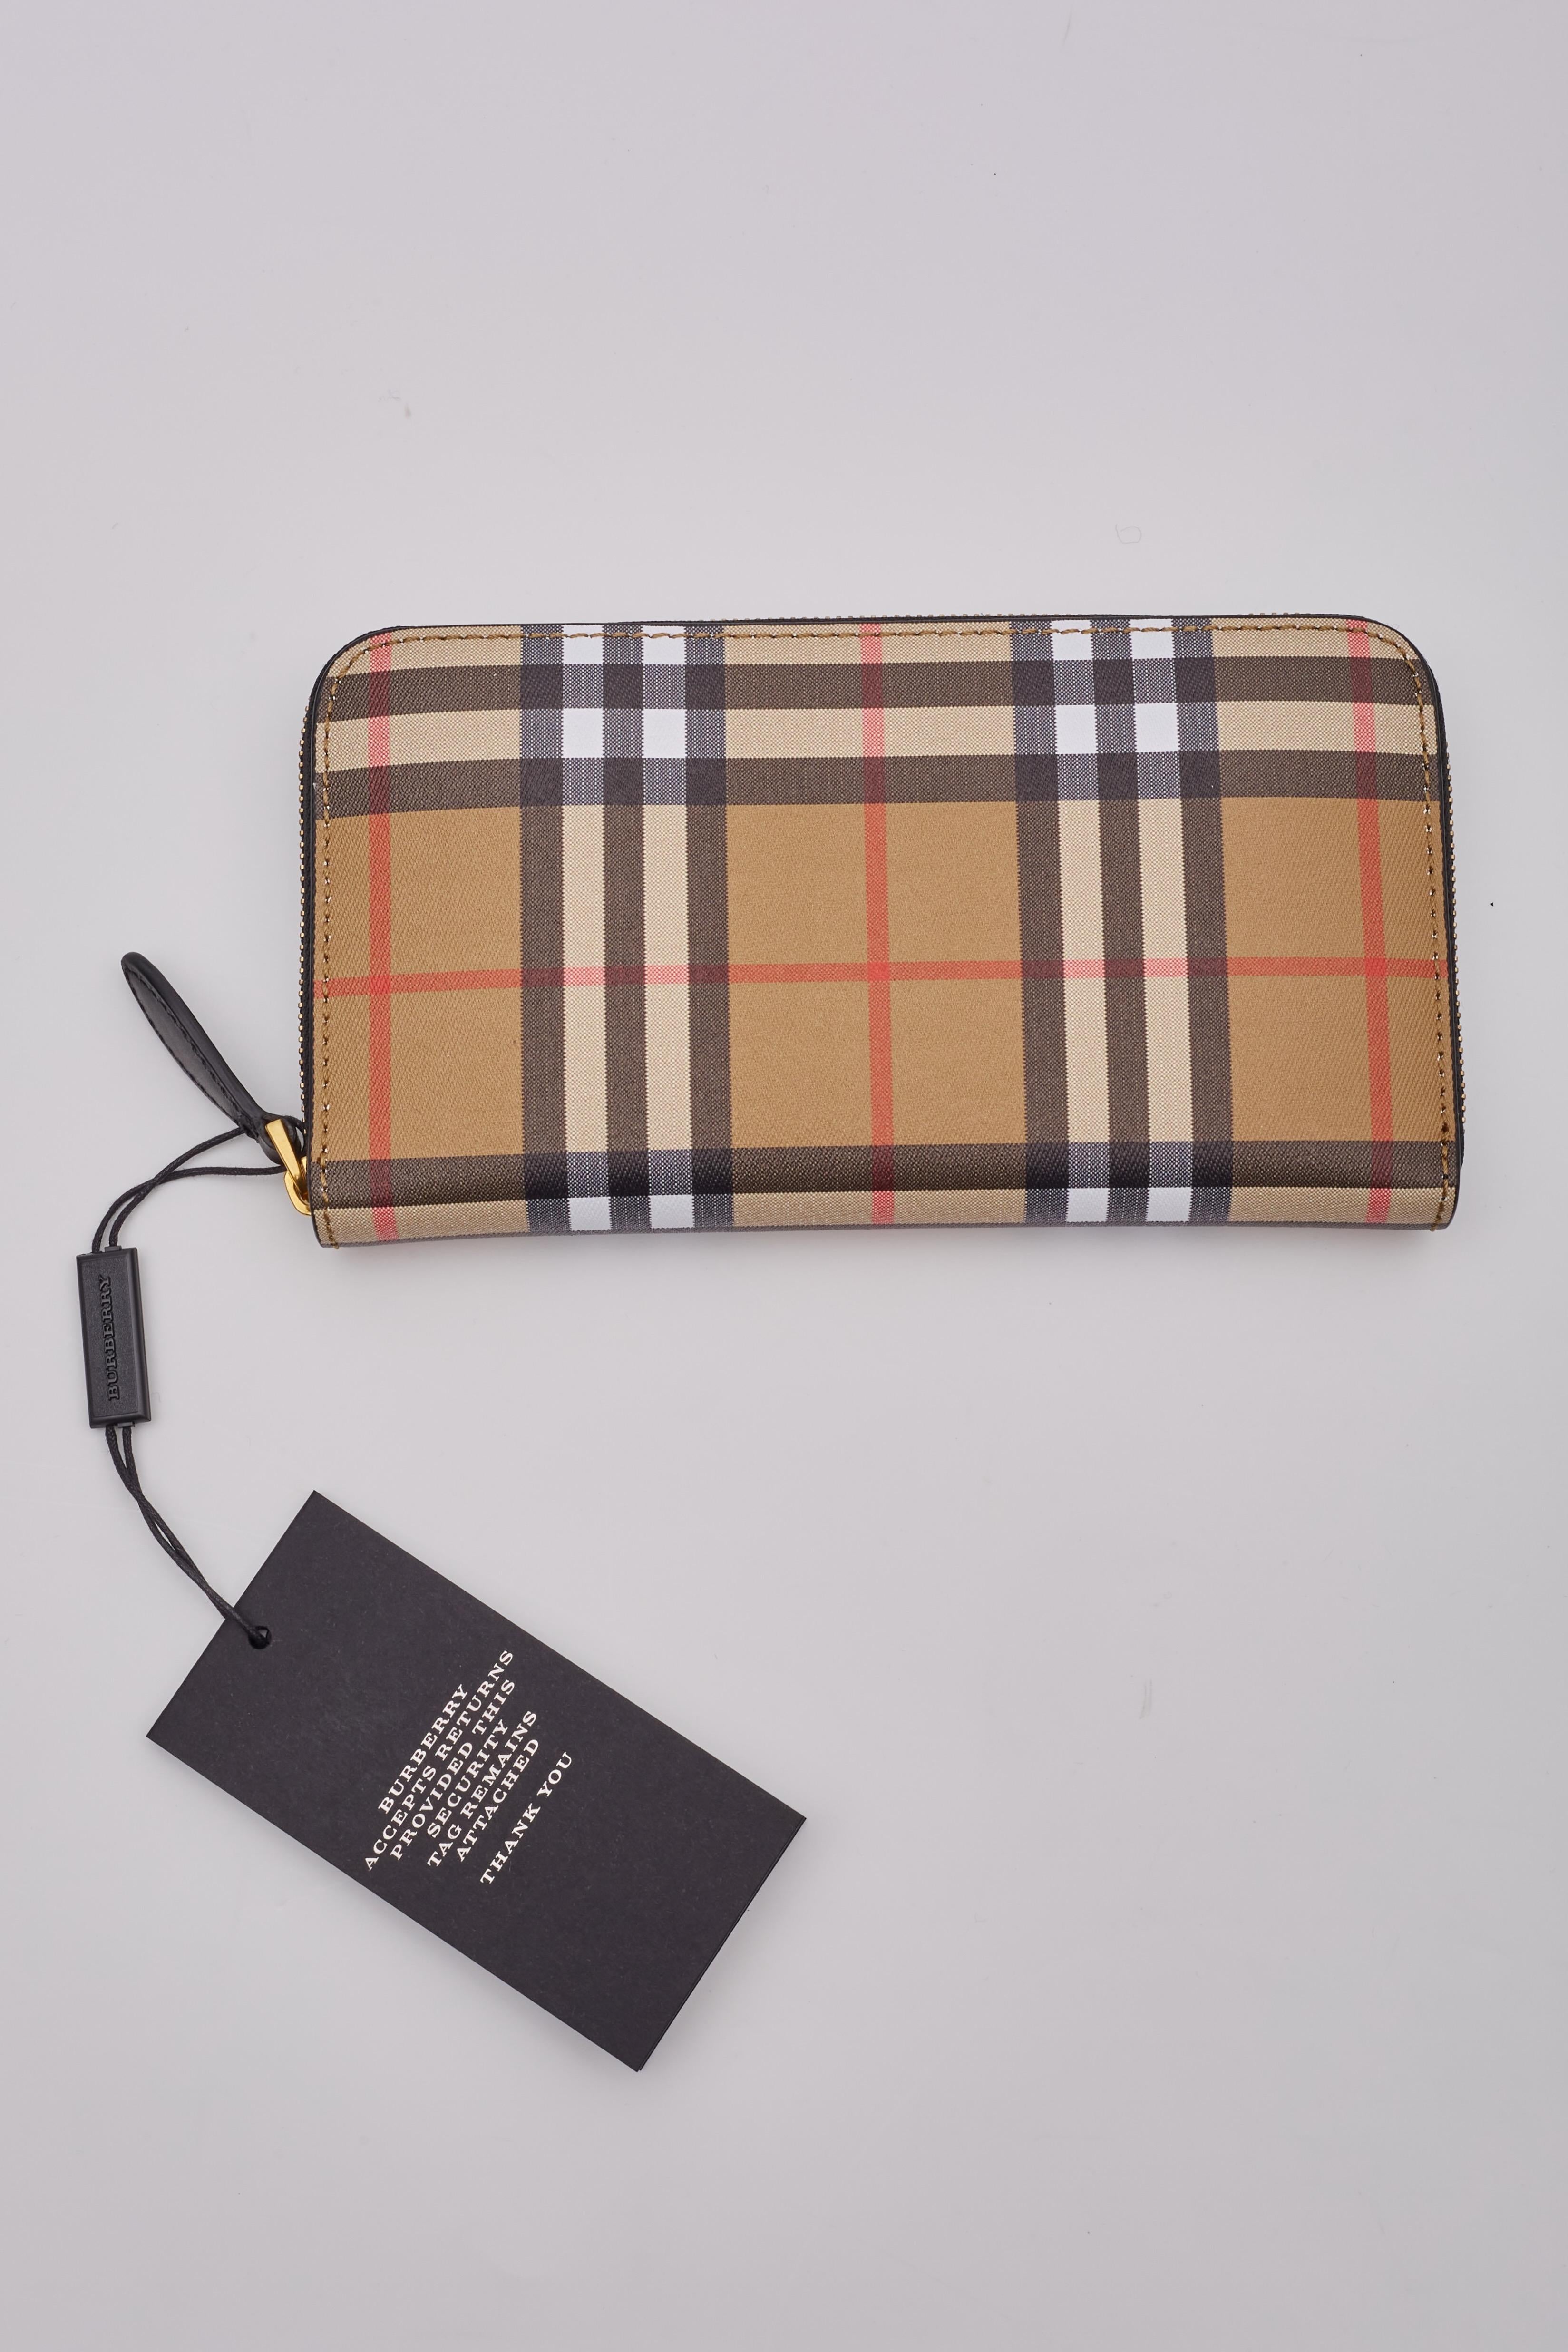 This wallet is made of leather with Burberry check print and has a 3/4 wrap around brass zipper that opens to a black leather interior lined with card slots, flat pockets, and a central zipper pocket.

Color: Beige Burberry check
Material: